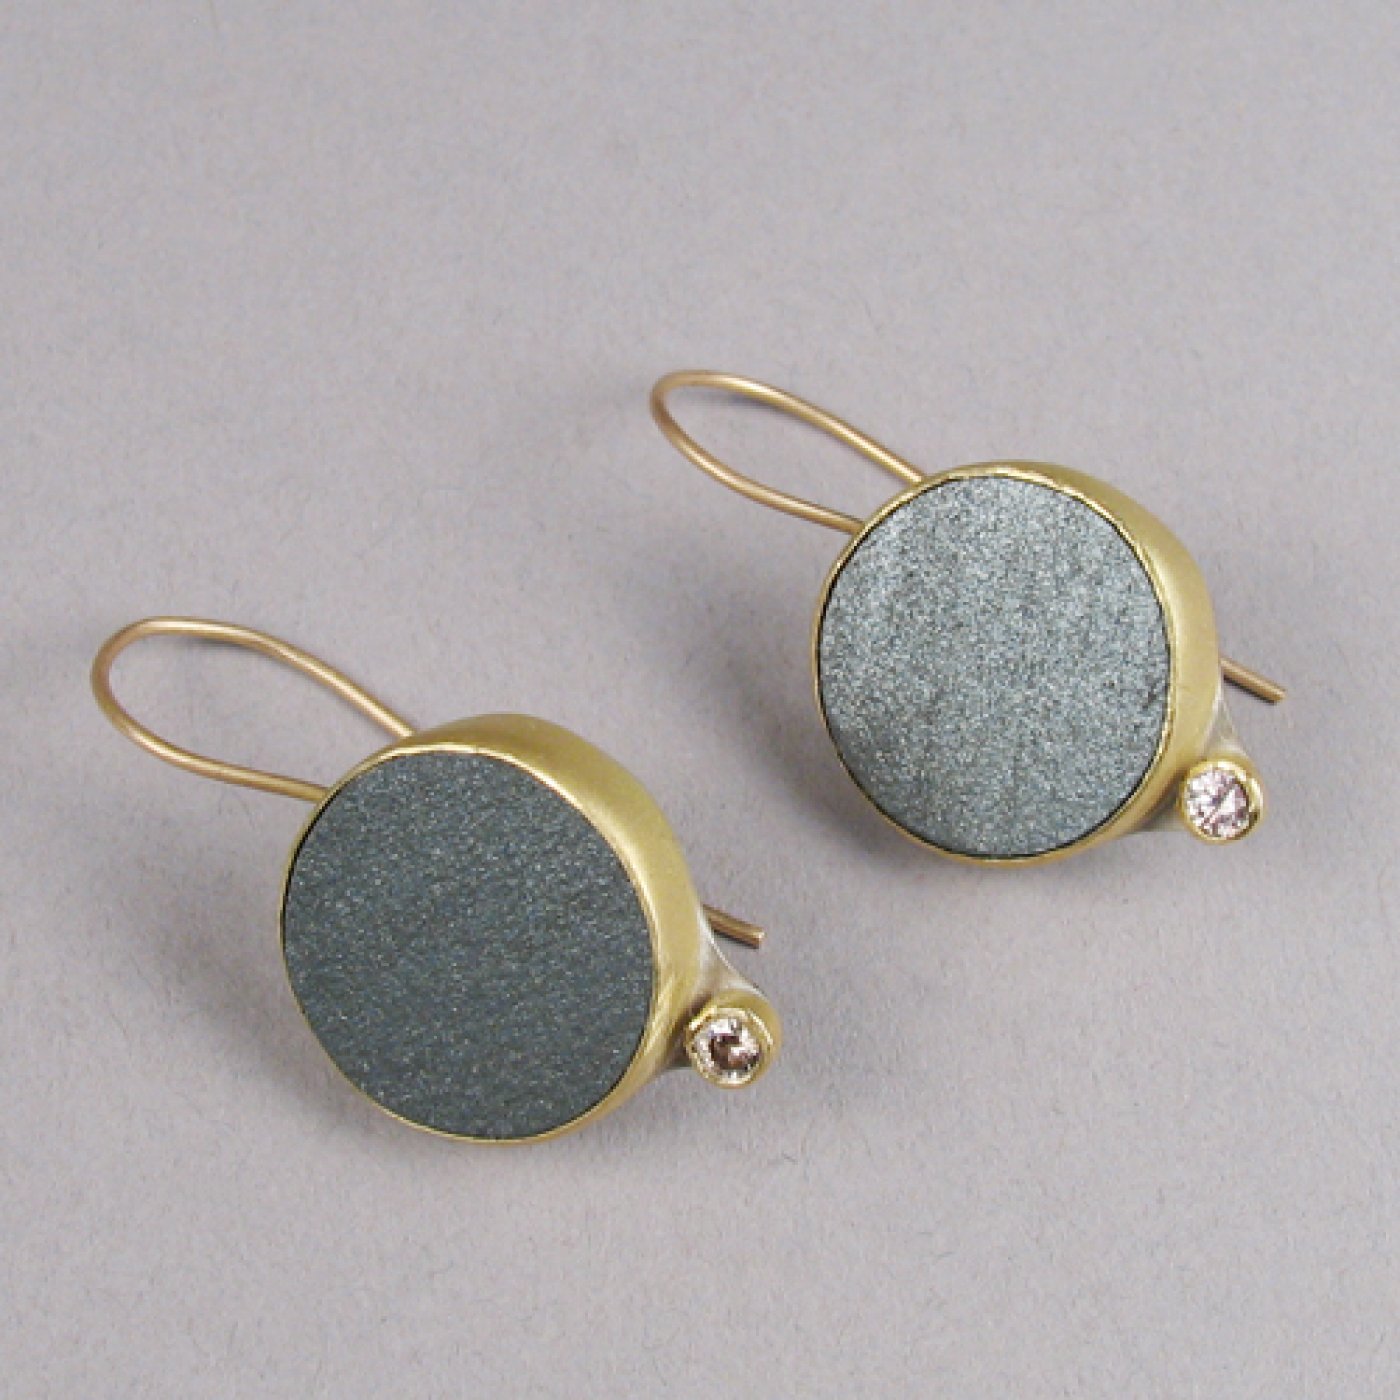 18K Gold Earrings with Rough Hematite and Chocolate Diamonds | Shiprock ...